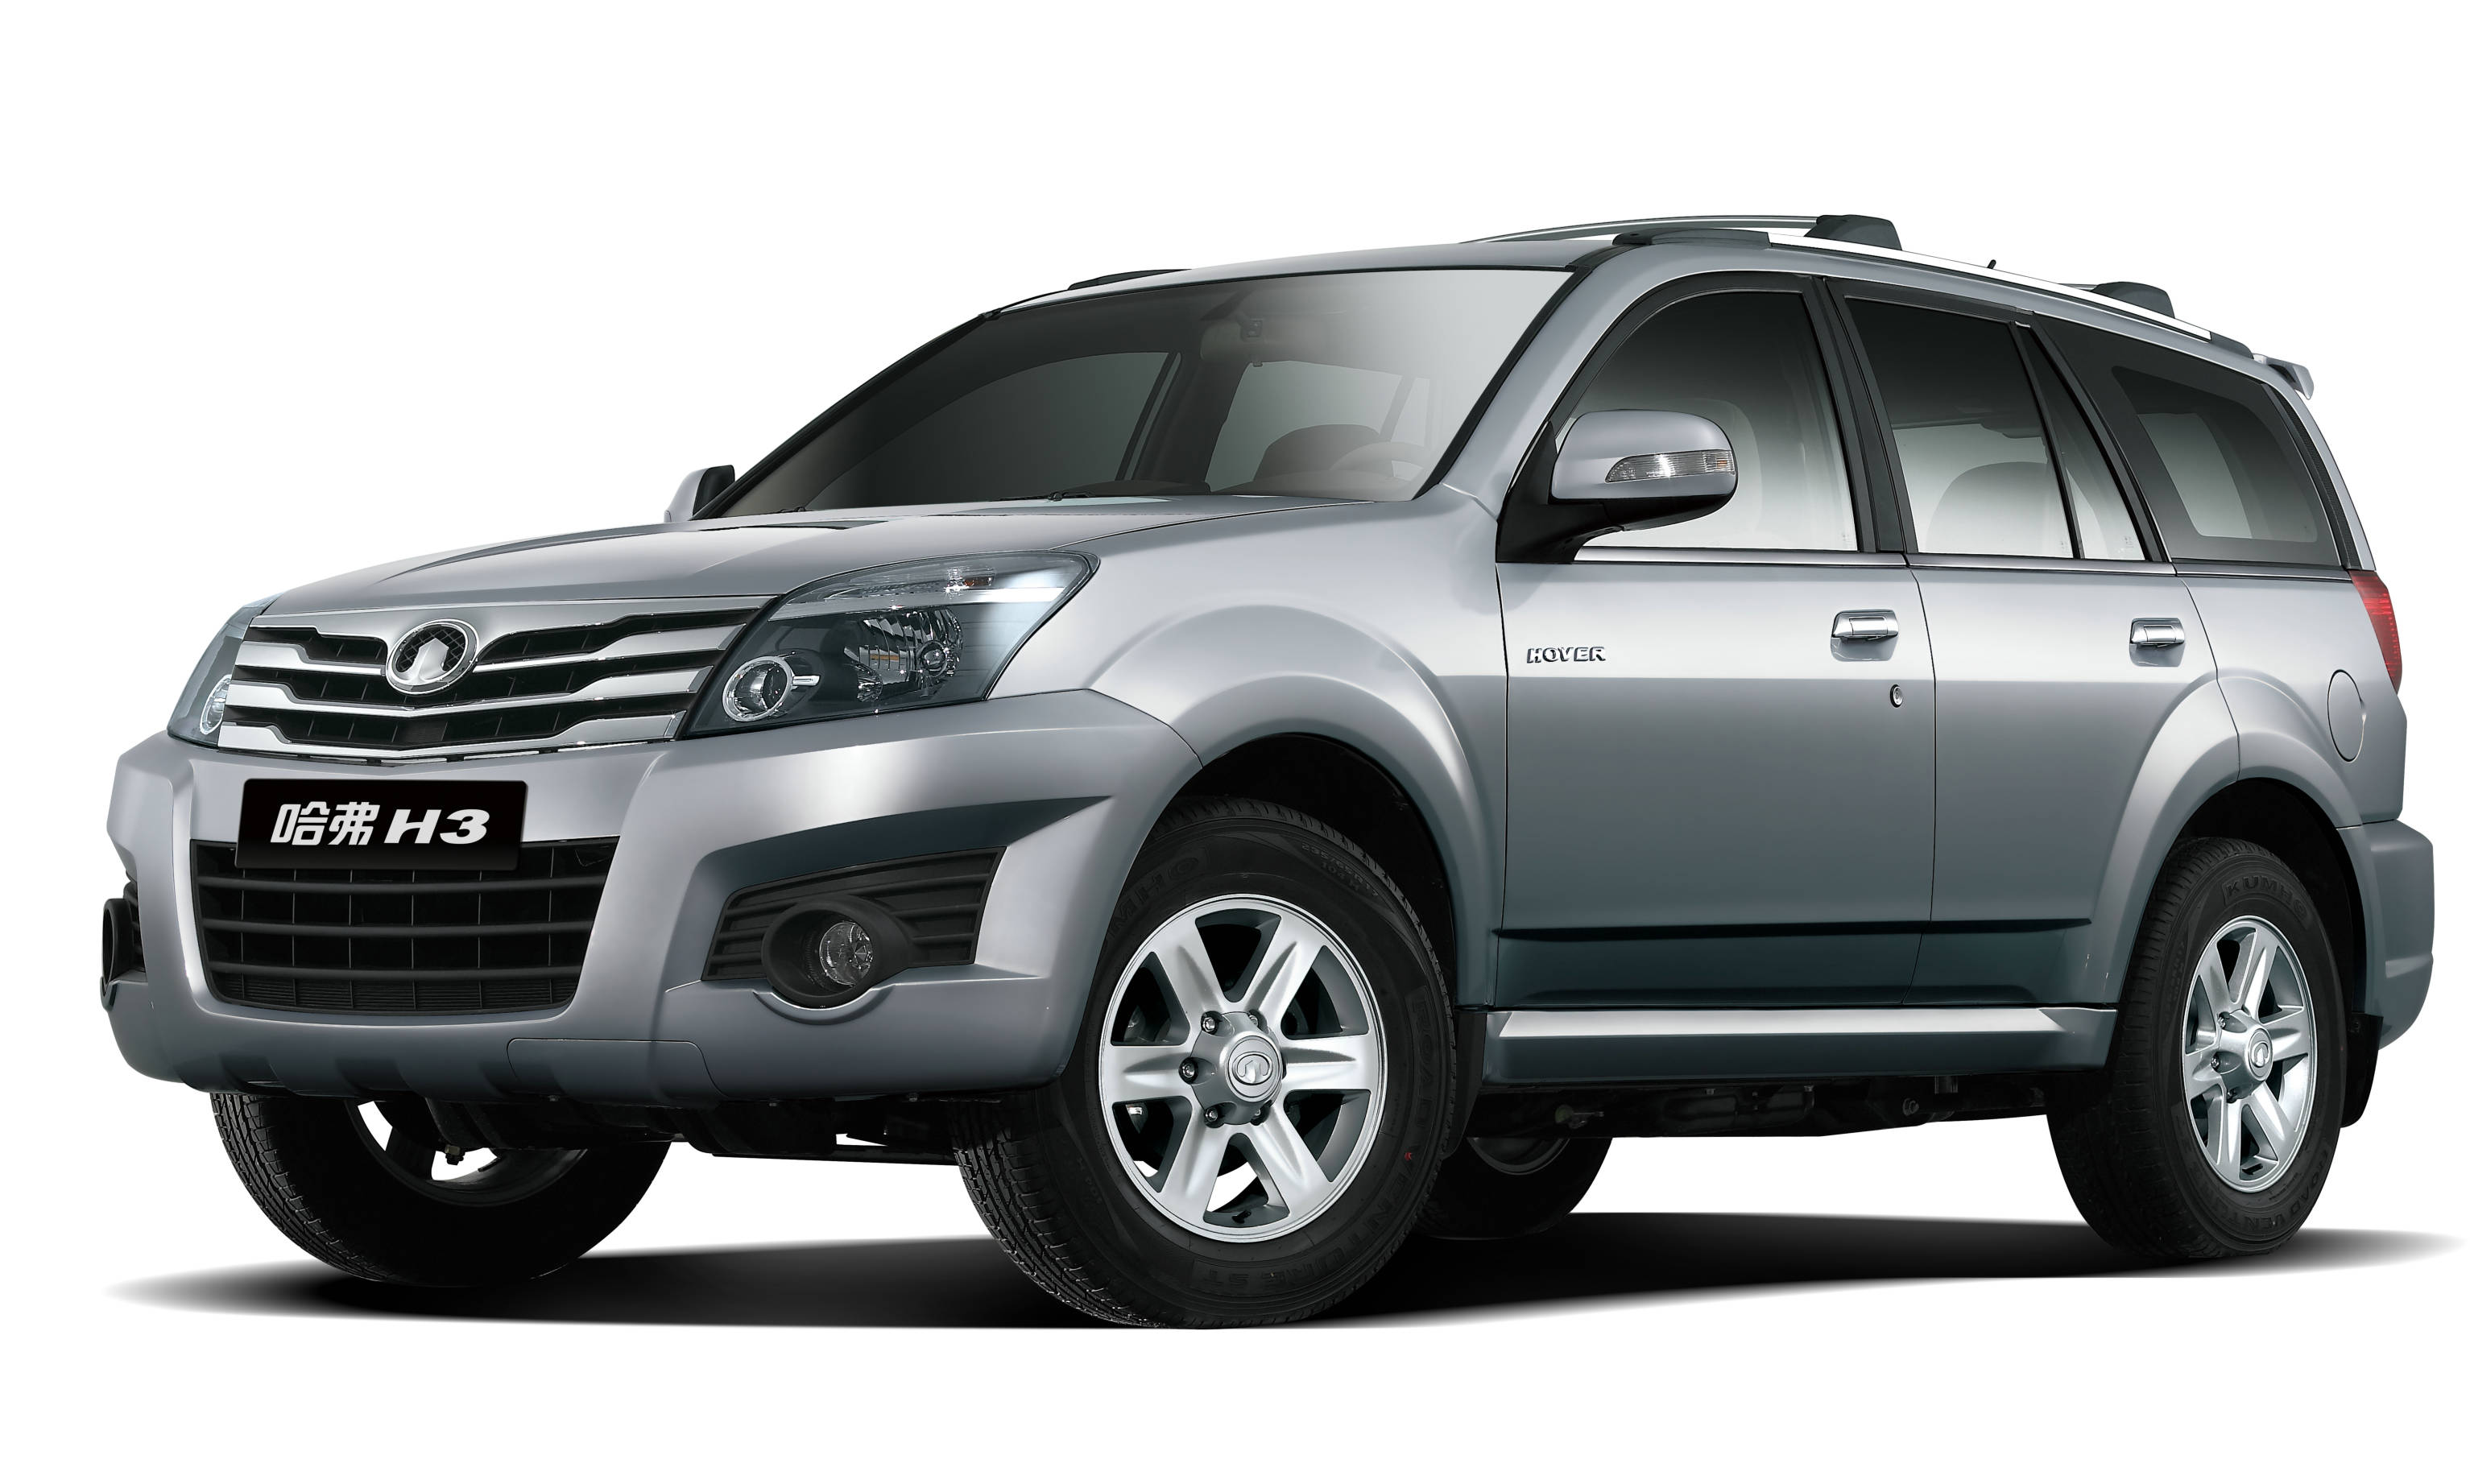 Ховер 2л. Great Wall Hover h3. Great Wall Haval h3. Great Wall Hover h3 2005. Грейт вол Ховер н3.